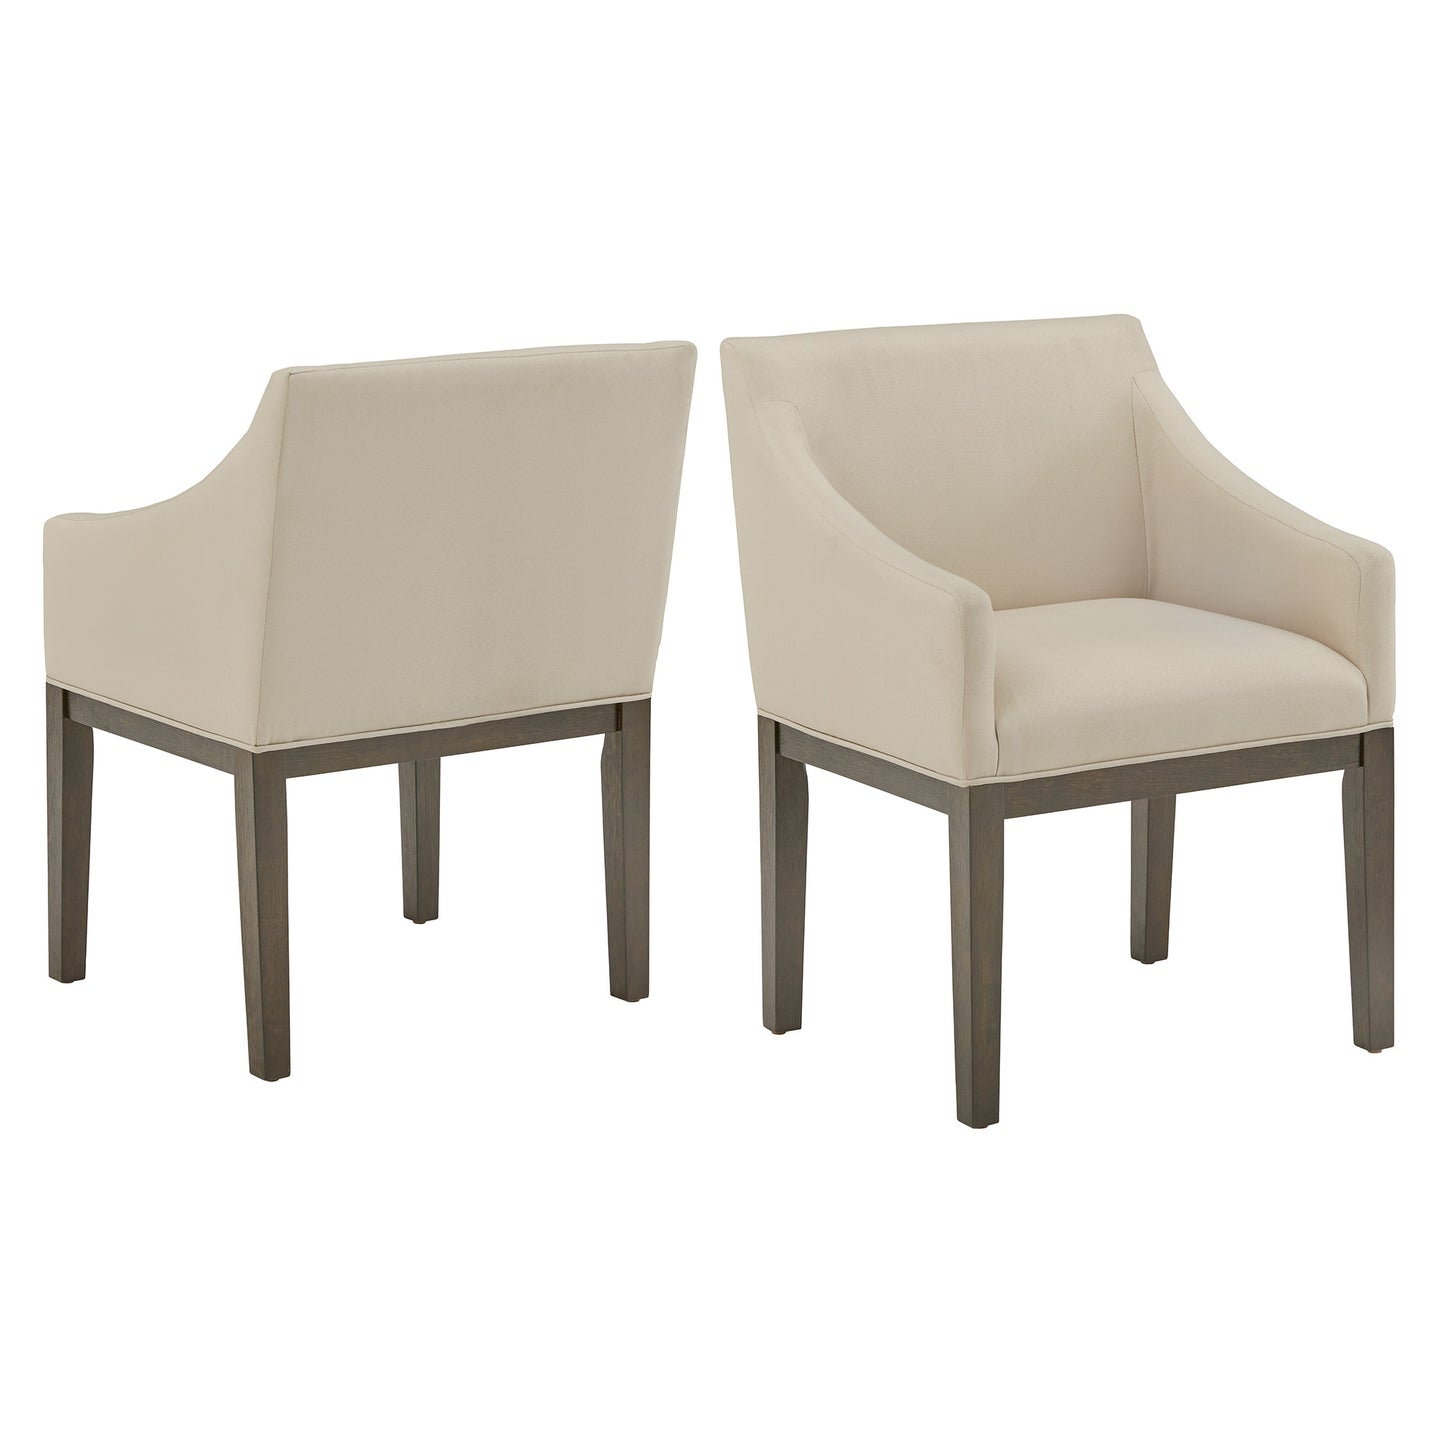 Weathered Grey Finish Fabric Dining Chair (Set of 2) - Beige Linen, Slope Arm